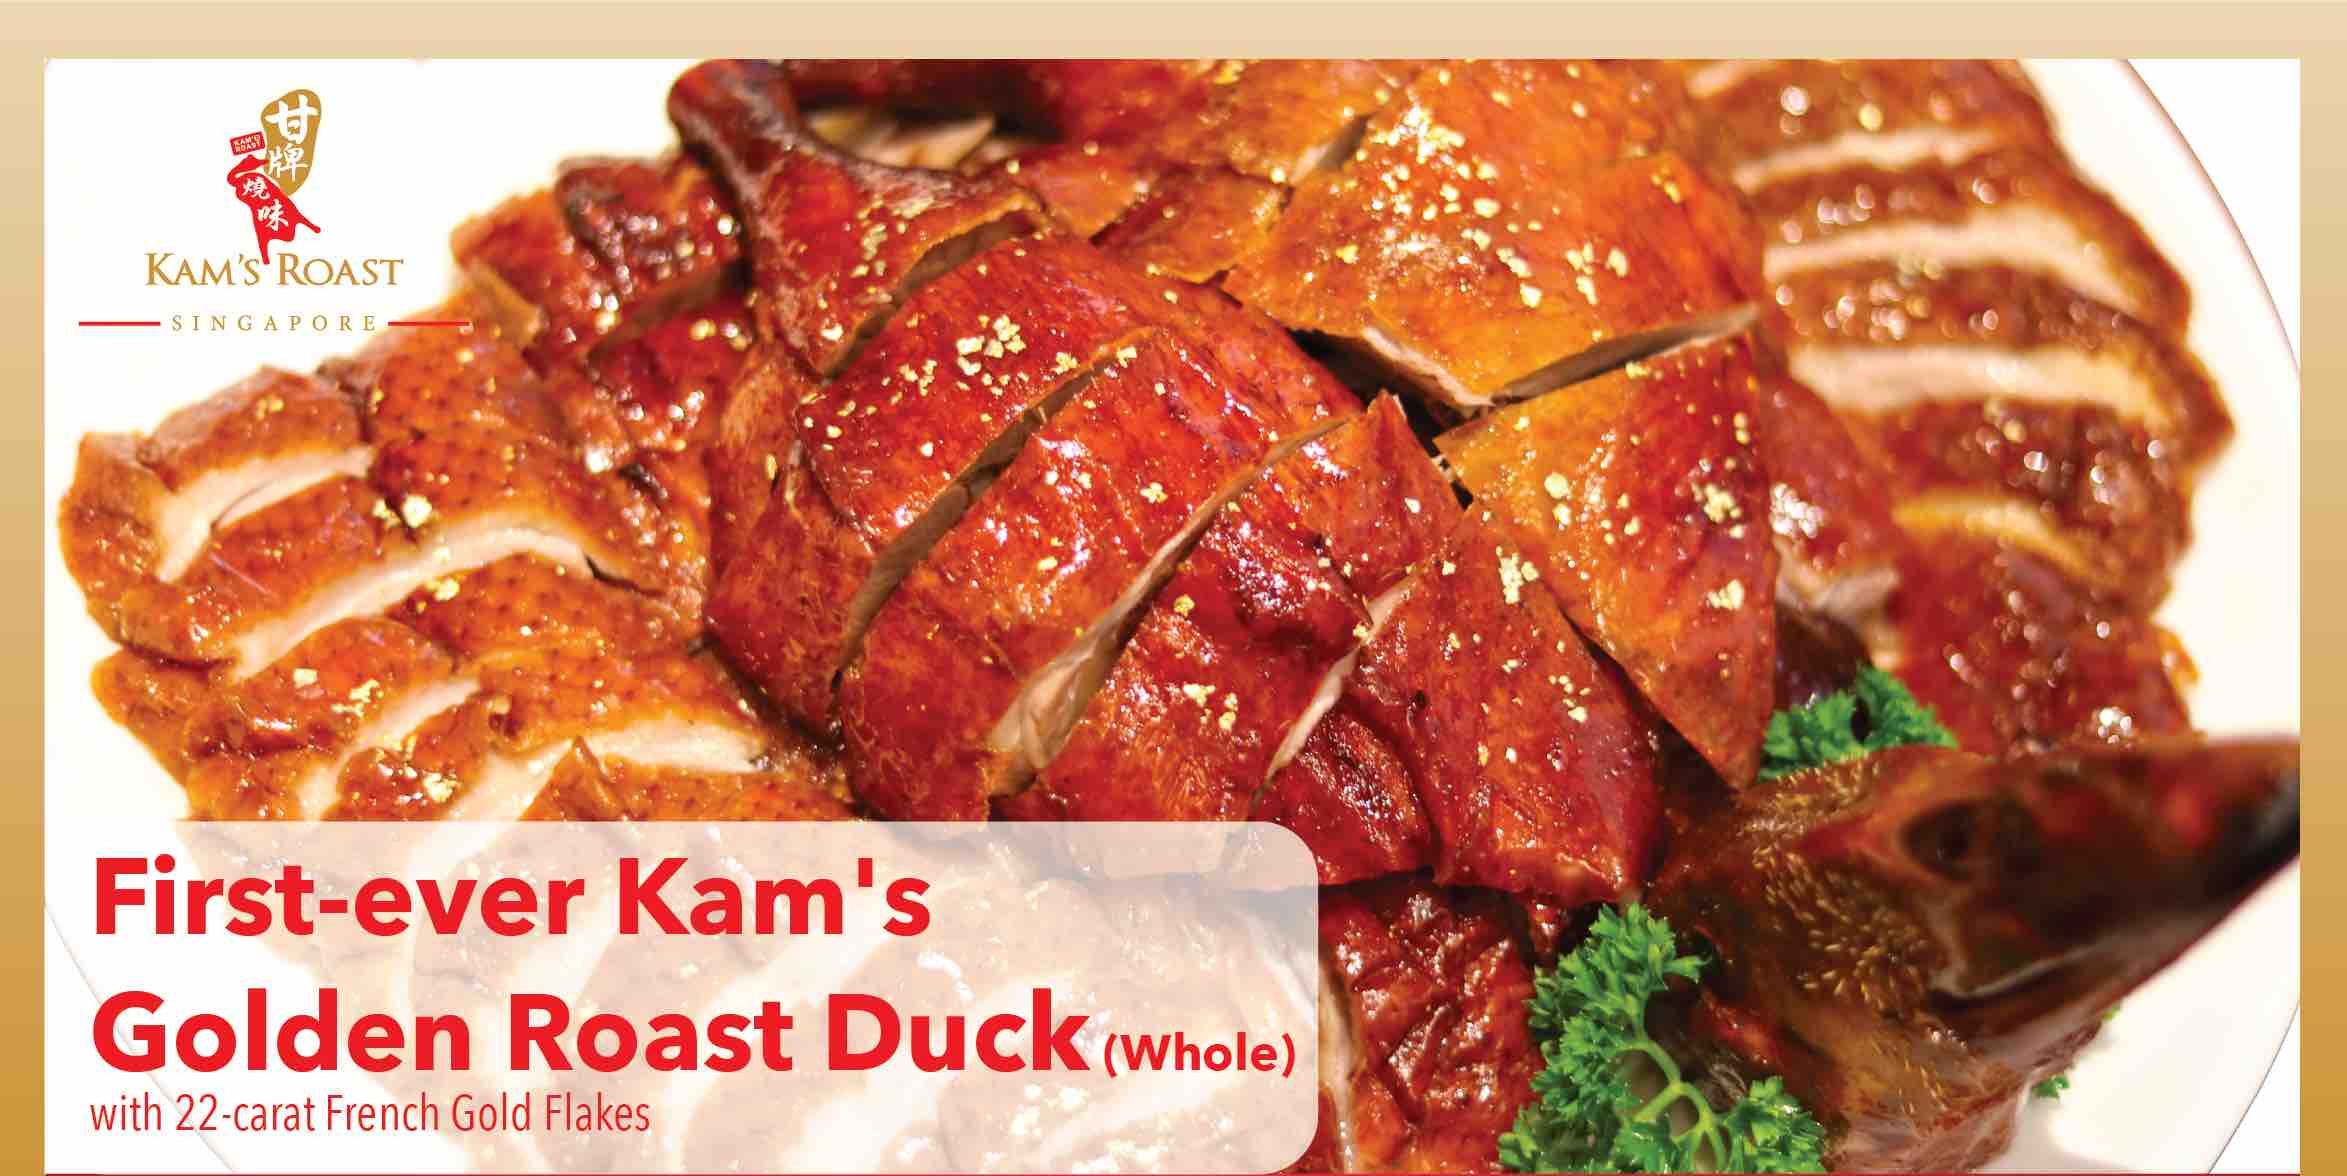 Kam’s Roast Singapore Chinese New Year Takeaway Menu is open for Pre-Order now!